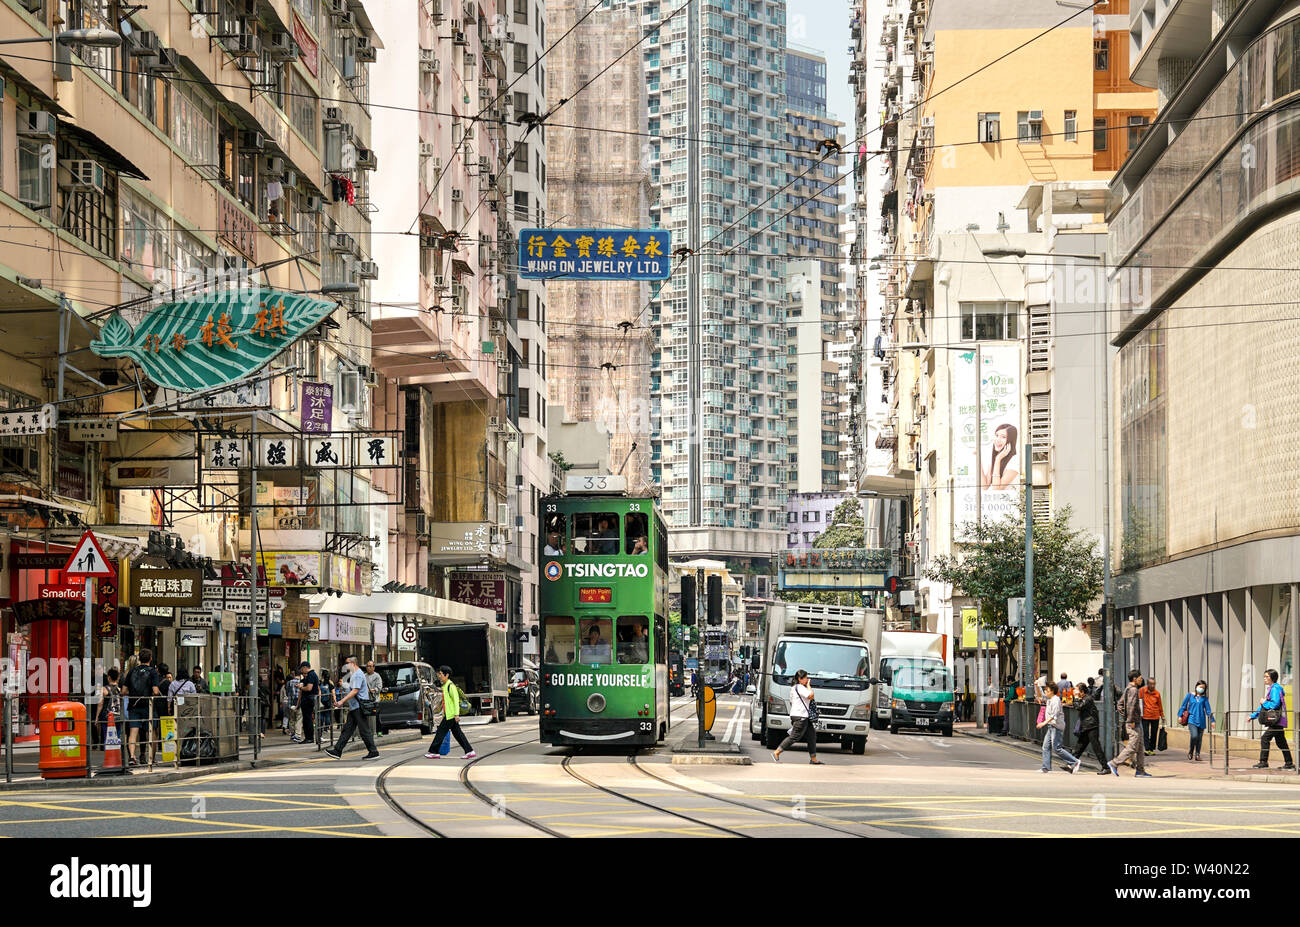 Wan Chai, Hong Kong-March 16, 2018: Hong Kong trams or Ding Ding. The tram system is one of the earliest public transport, having opened in 1904. Very Stock Photo